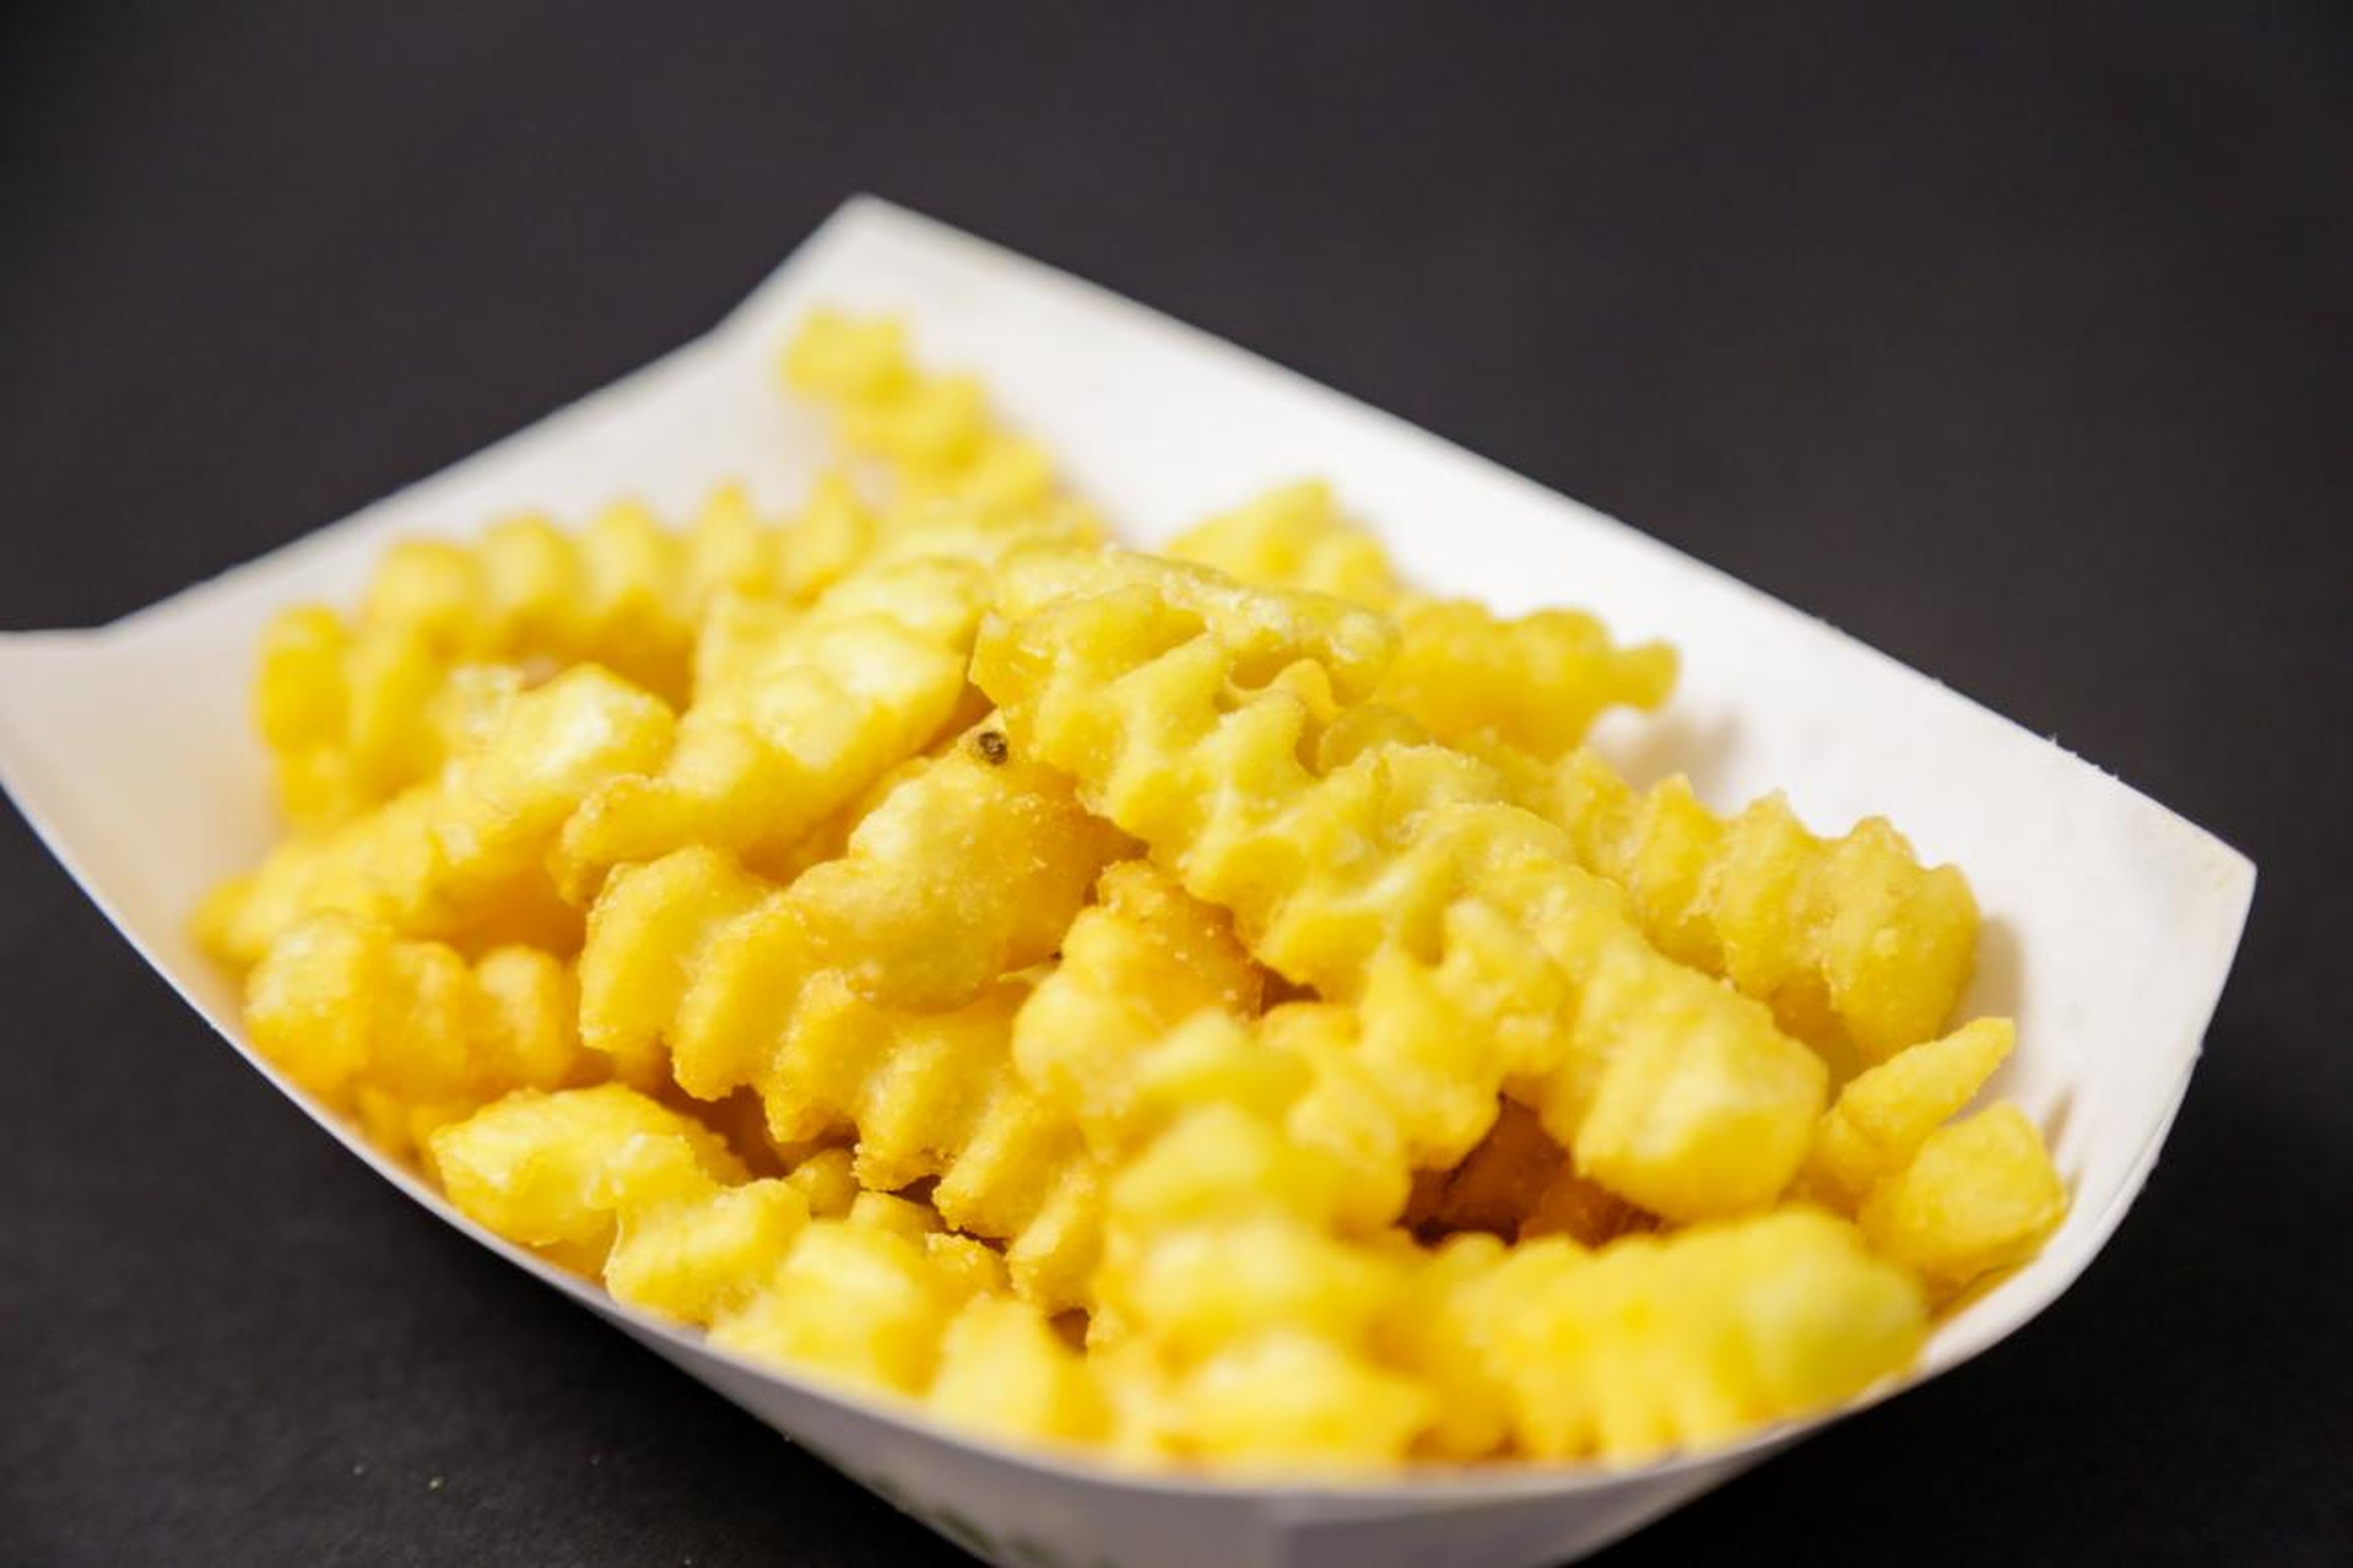 It's definitely plausible that Shake Shack had extraterrestrial help to perfect its fries. Each fry is coated in a layer of golden crisp that gives way to a soft, welcoming interior. They hit savory and umami, with a hint of